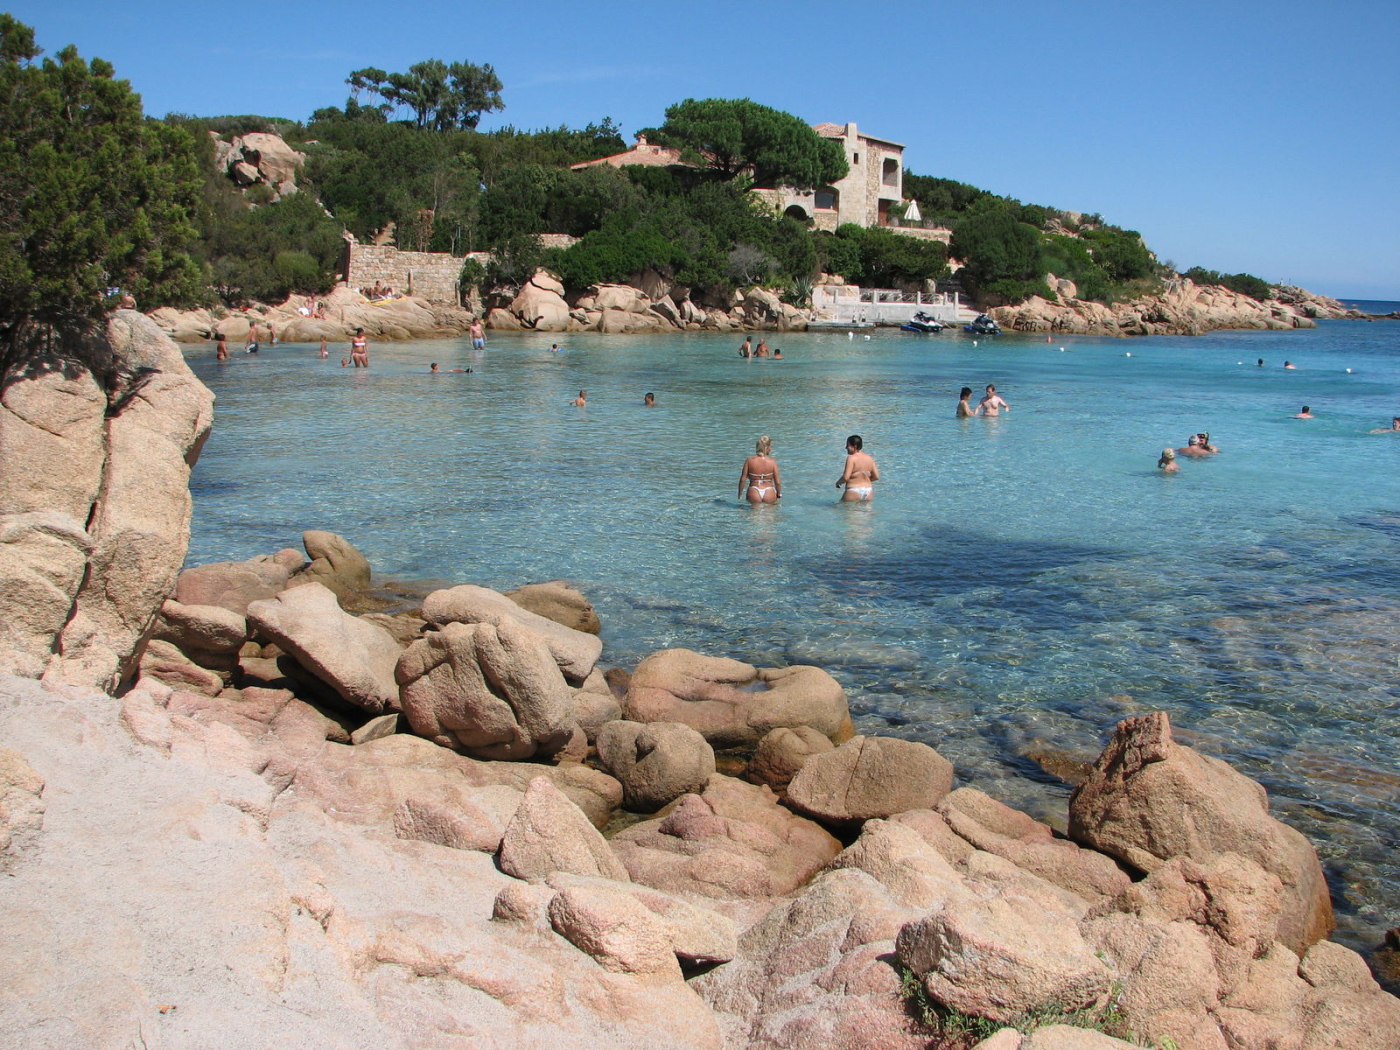 Relax on the beach on the Costa Smeralda, Italy